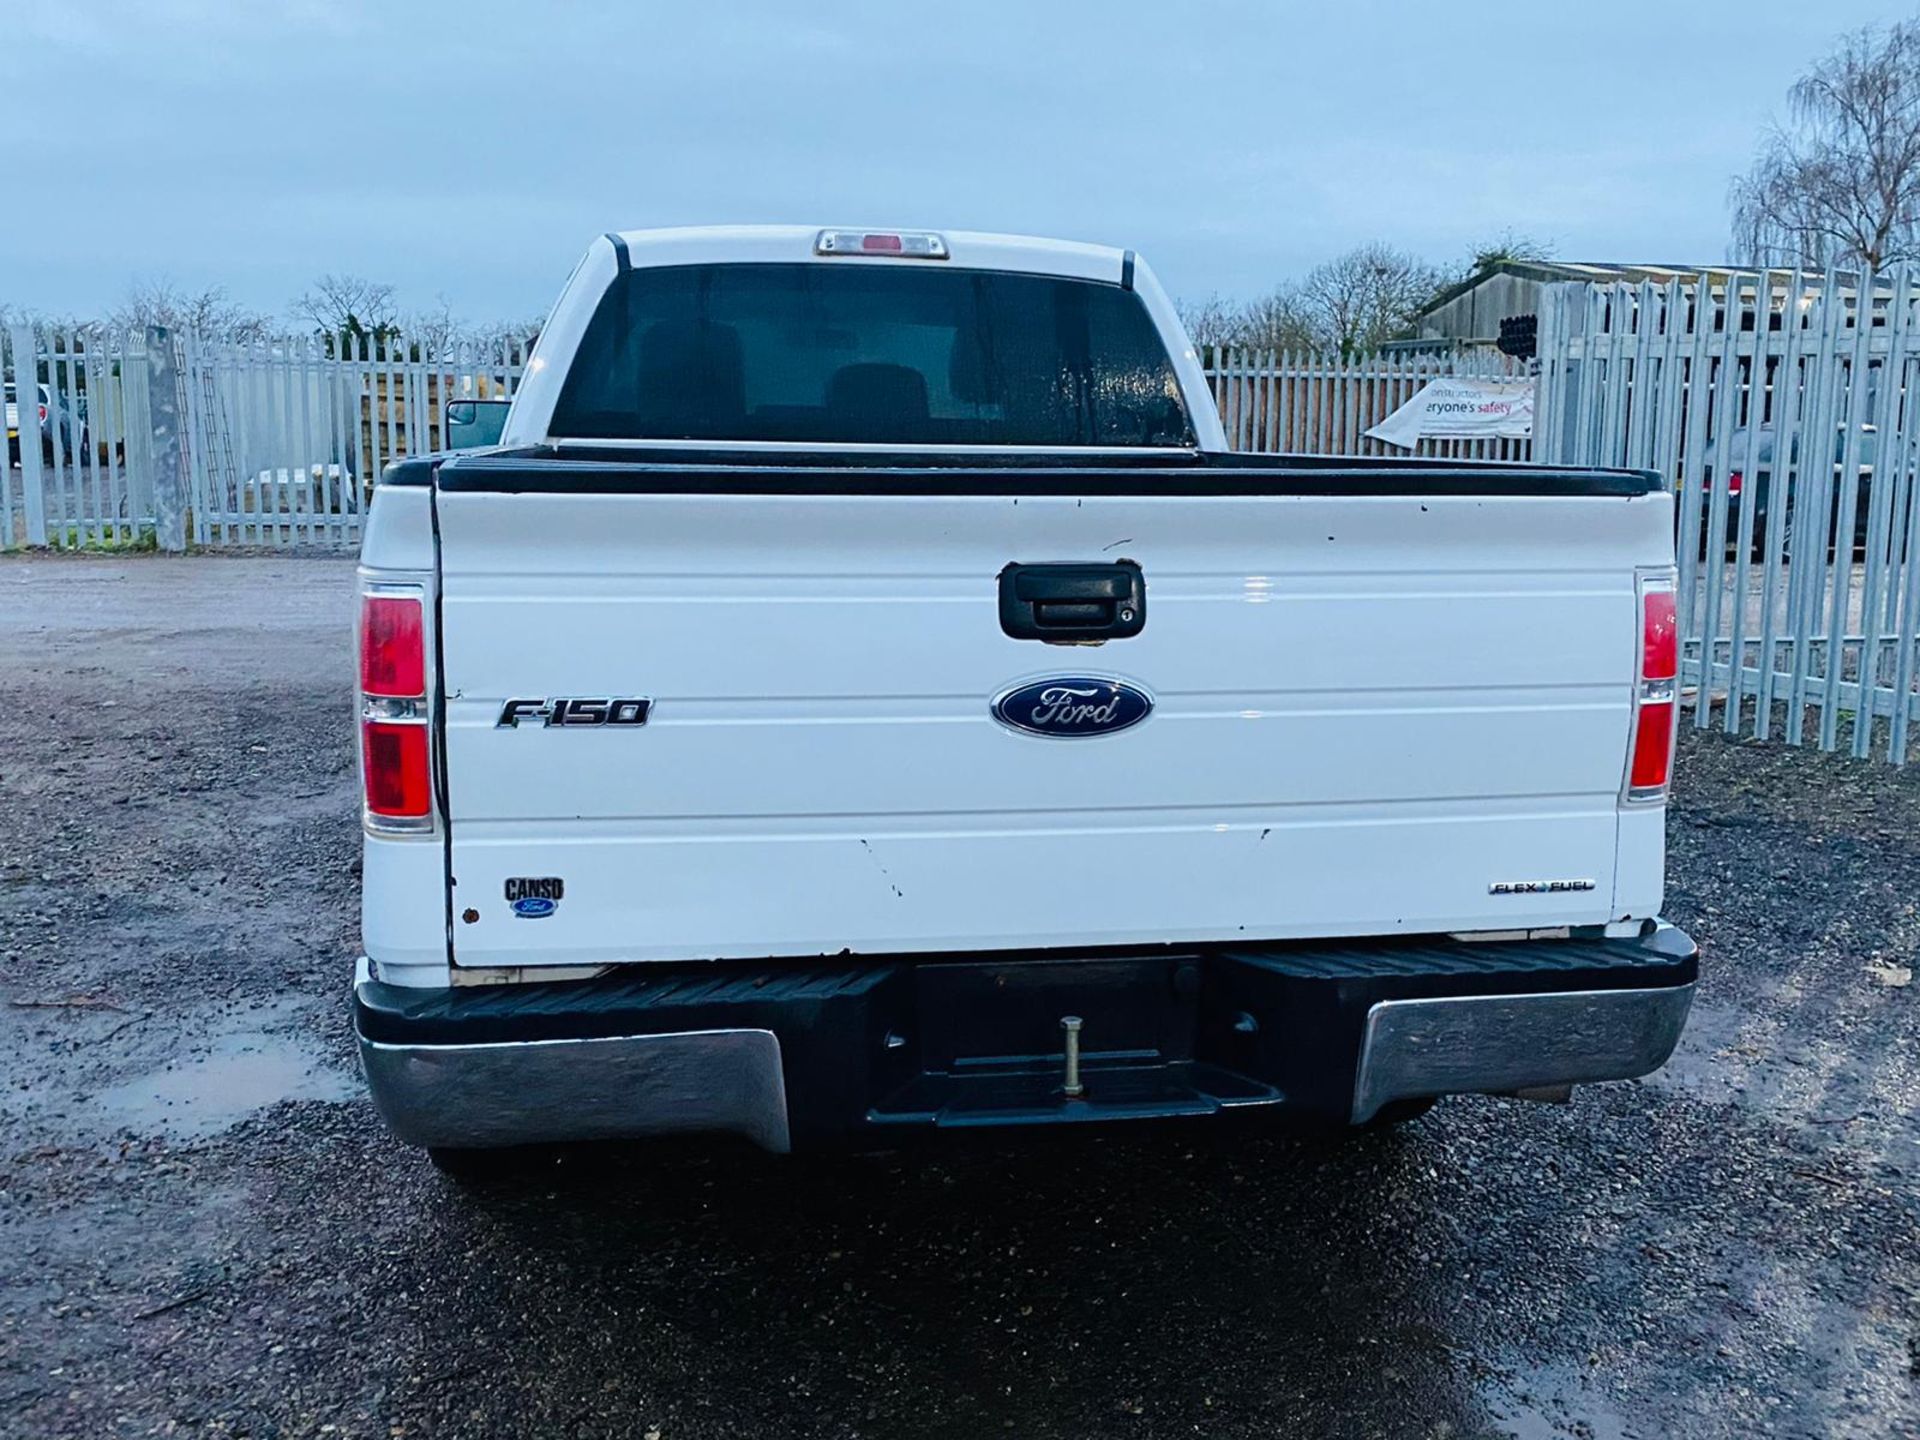 (Reserve Met)Ford F-150 XLT 3.7L V6 SuperCab - 2012 Year - 6 Seats - Air con - Fresh Import - - Image 12 of 34